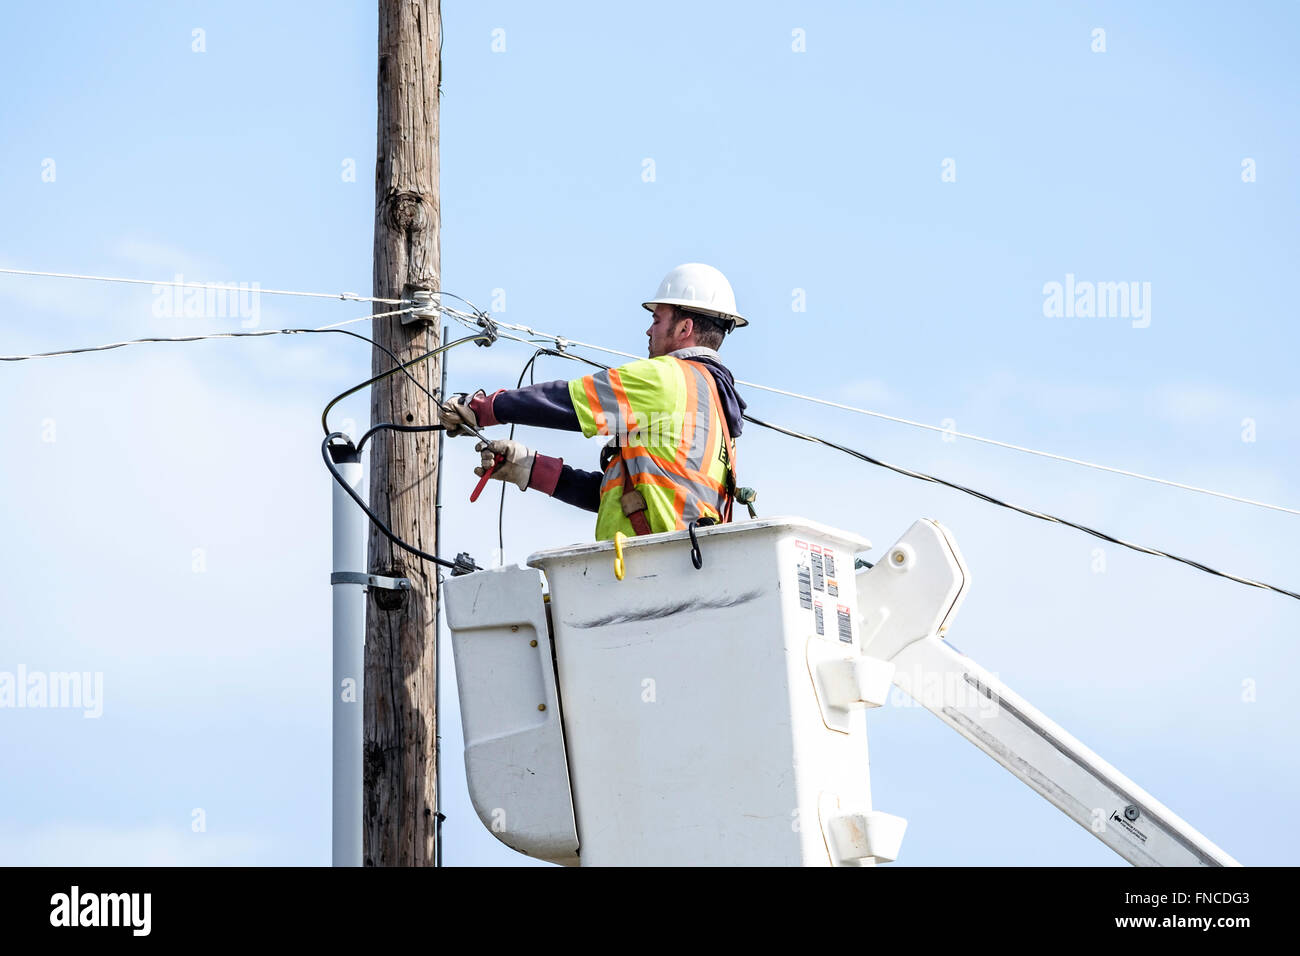 An American lineman repairs overhead electrical lines from a lift bucket in Oklahoma City, Oklahoma, USA. Stock Photo